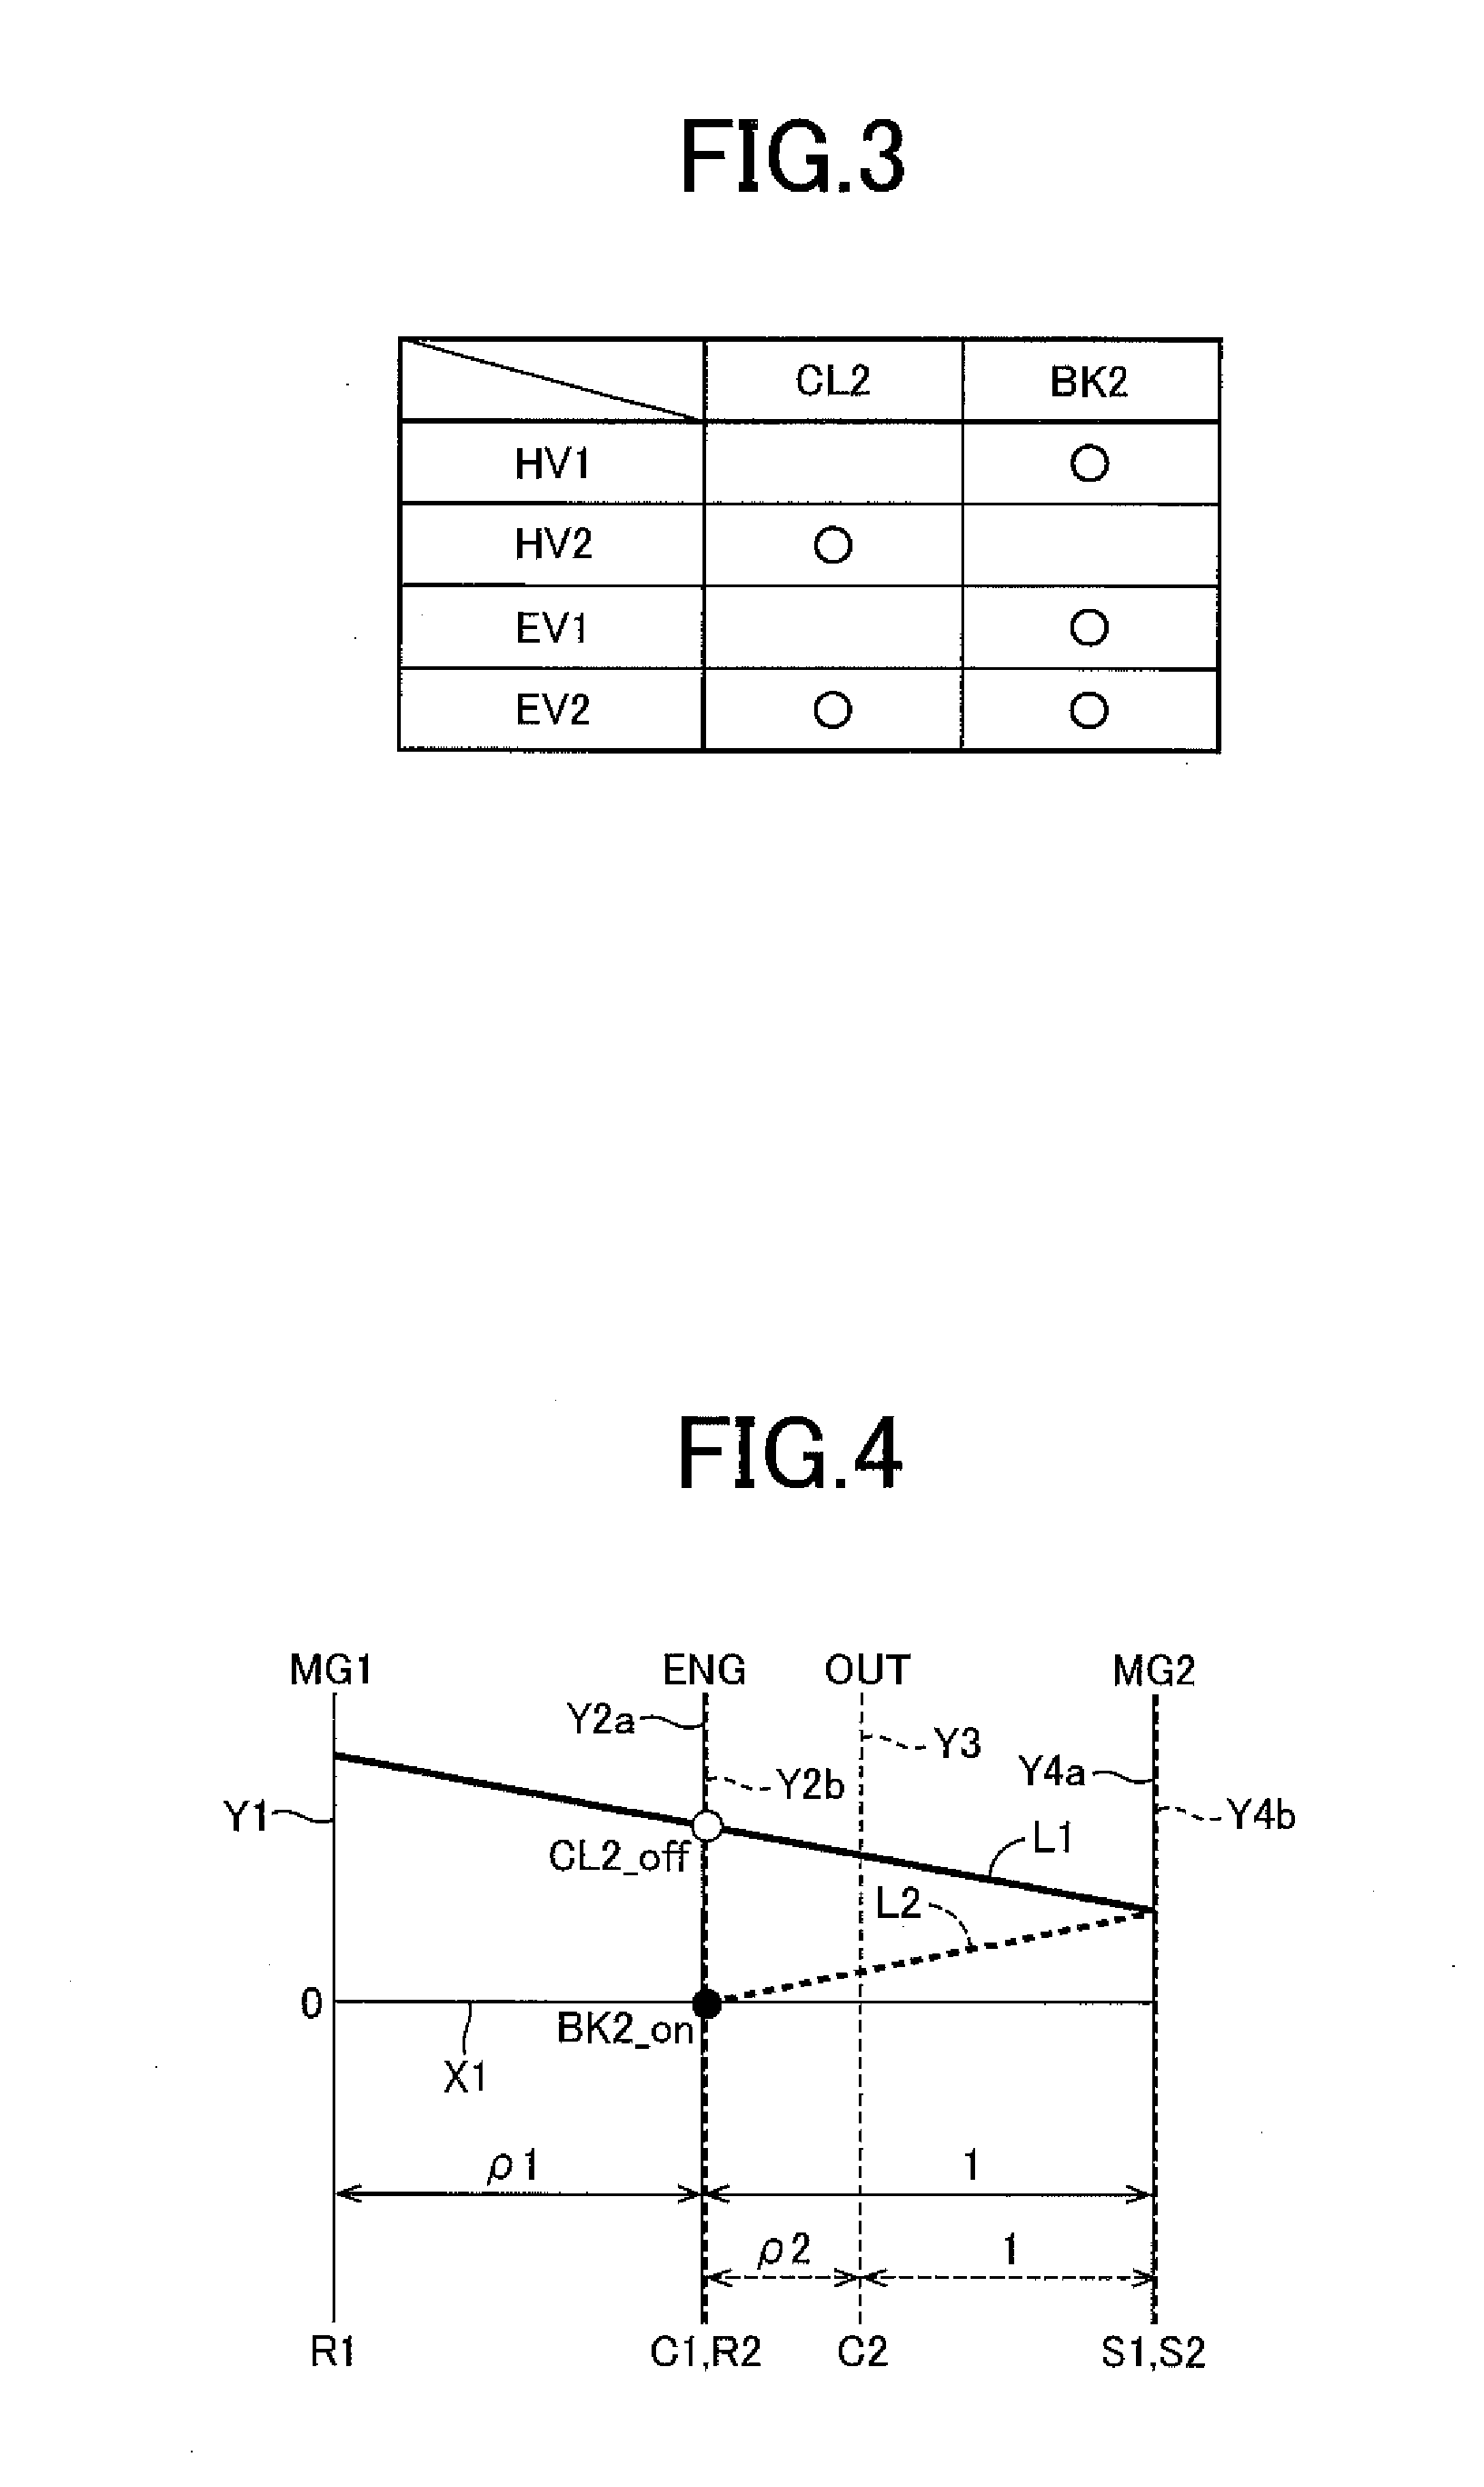 Control apparatus for a hybrid vehicle drive system